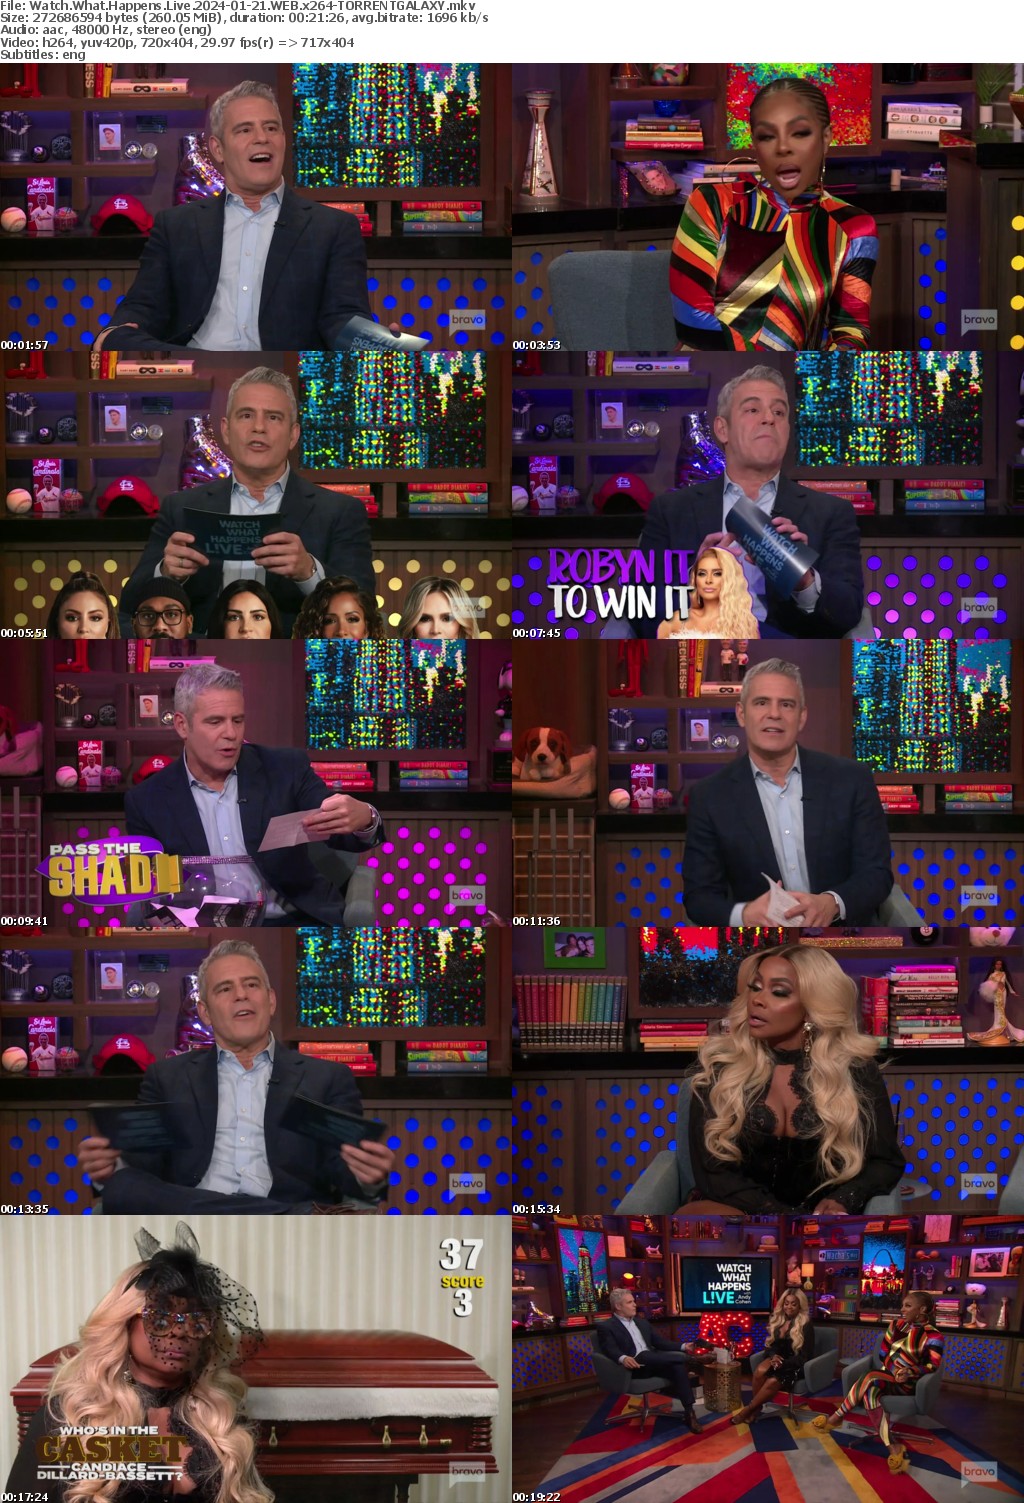 Watch What Happens Live 2024-01-21 WEB x264-GALAXY